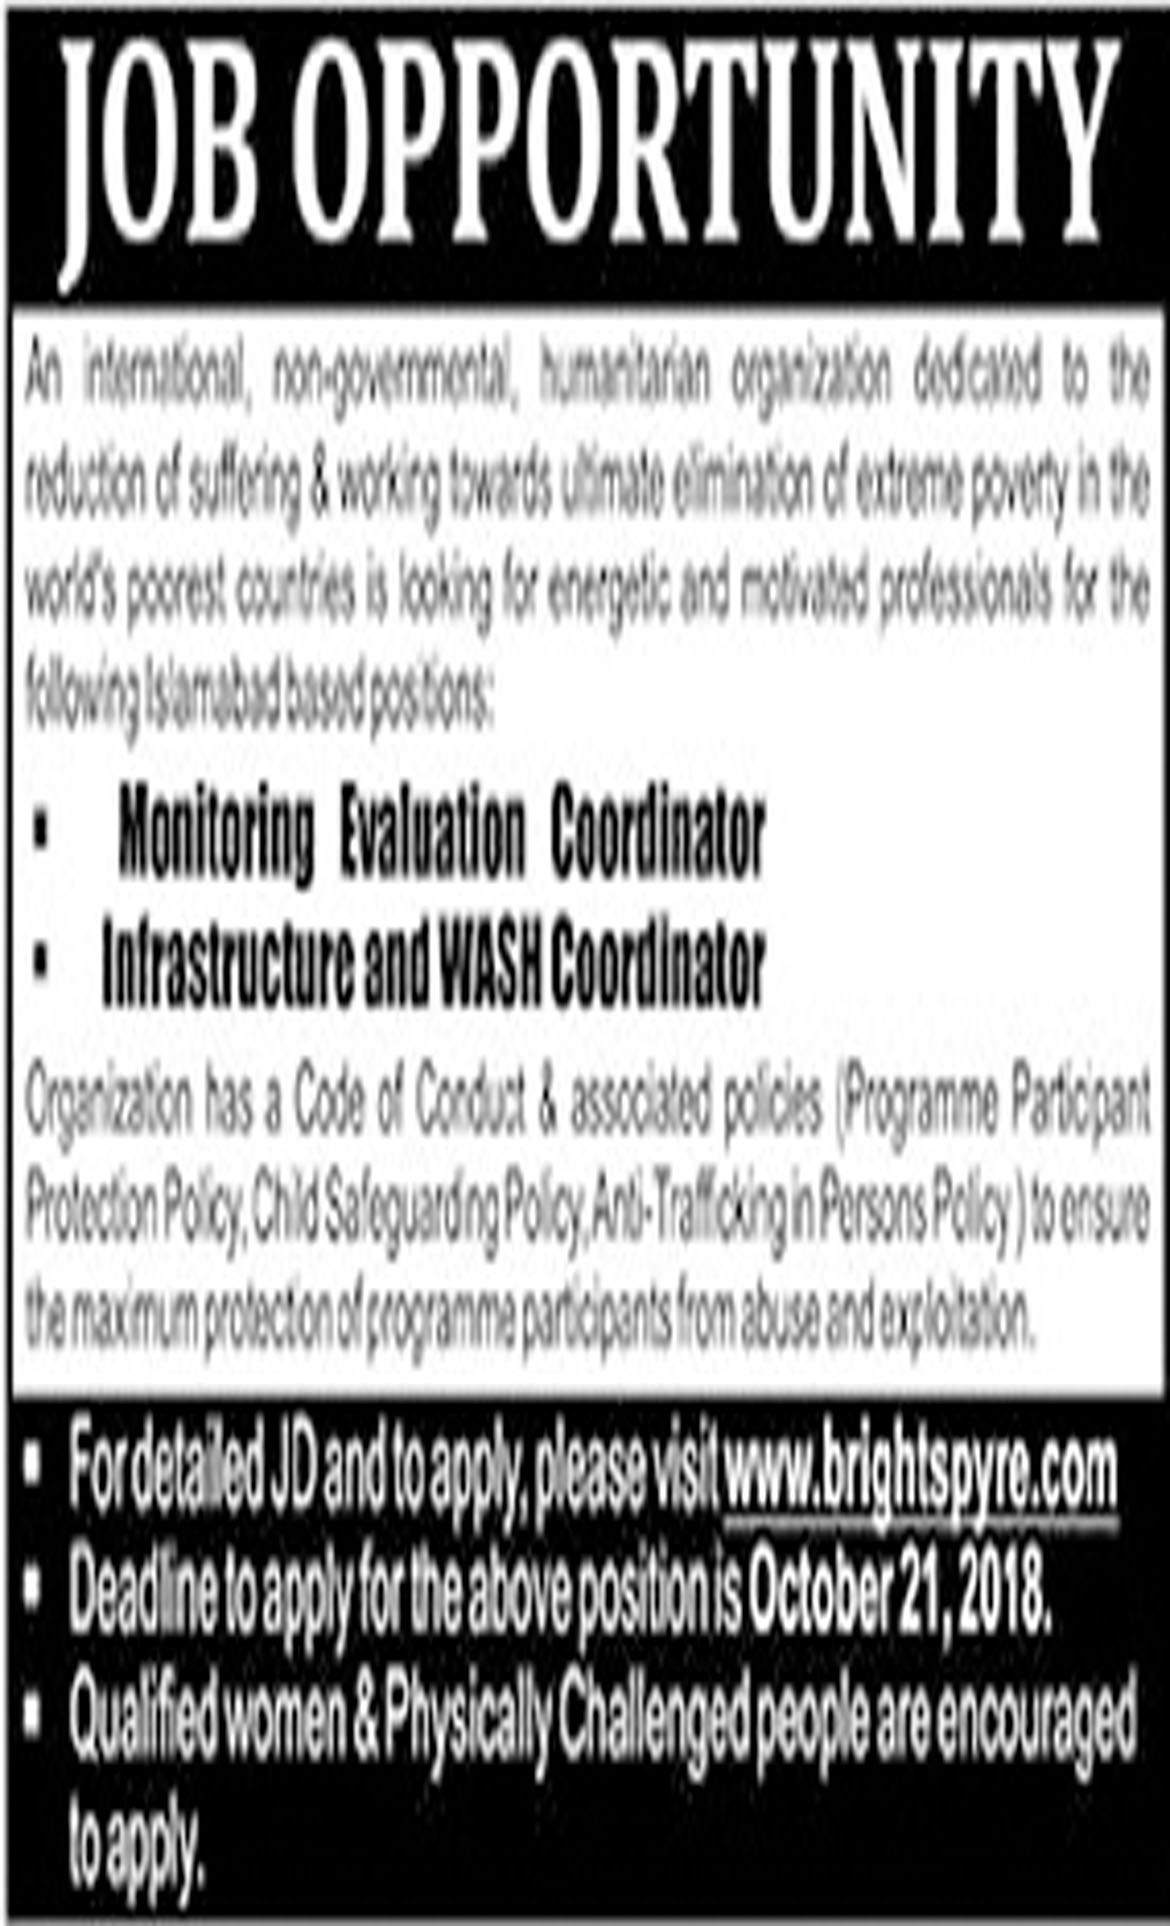 Jobs In Monitoring Evaluation Coordinator, Infrastructure And Wash Coordinator  17 Oct 2018